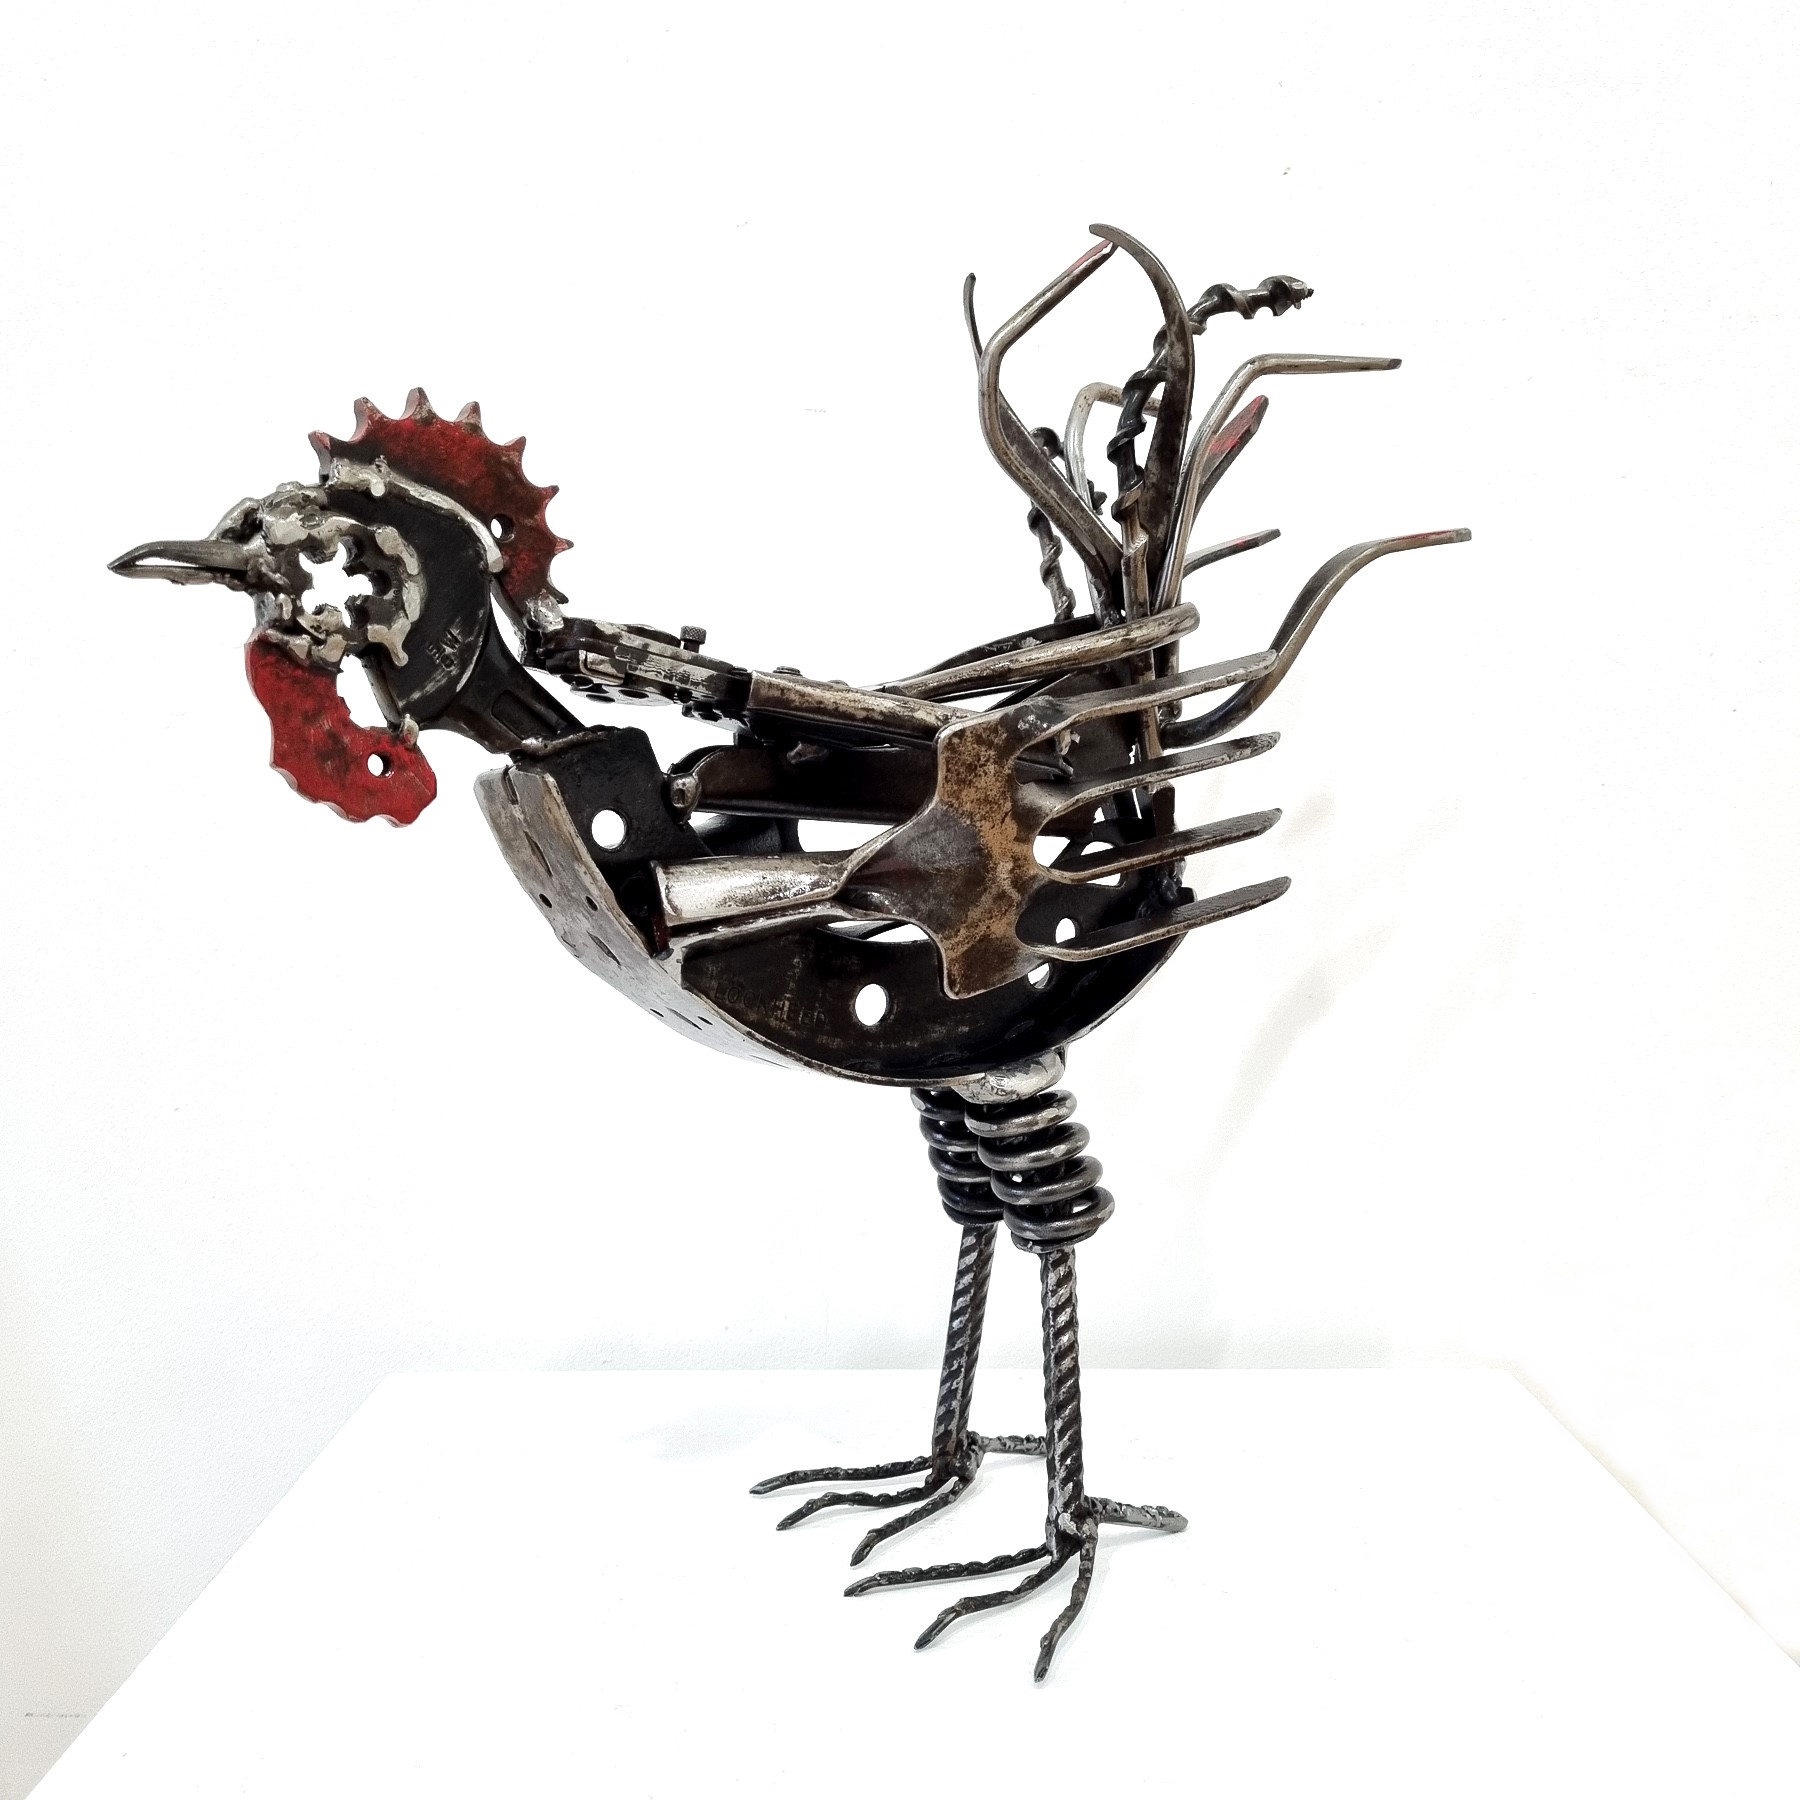 'Rooster' by artist Cath Kerr